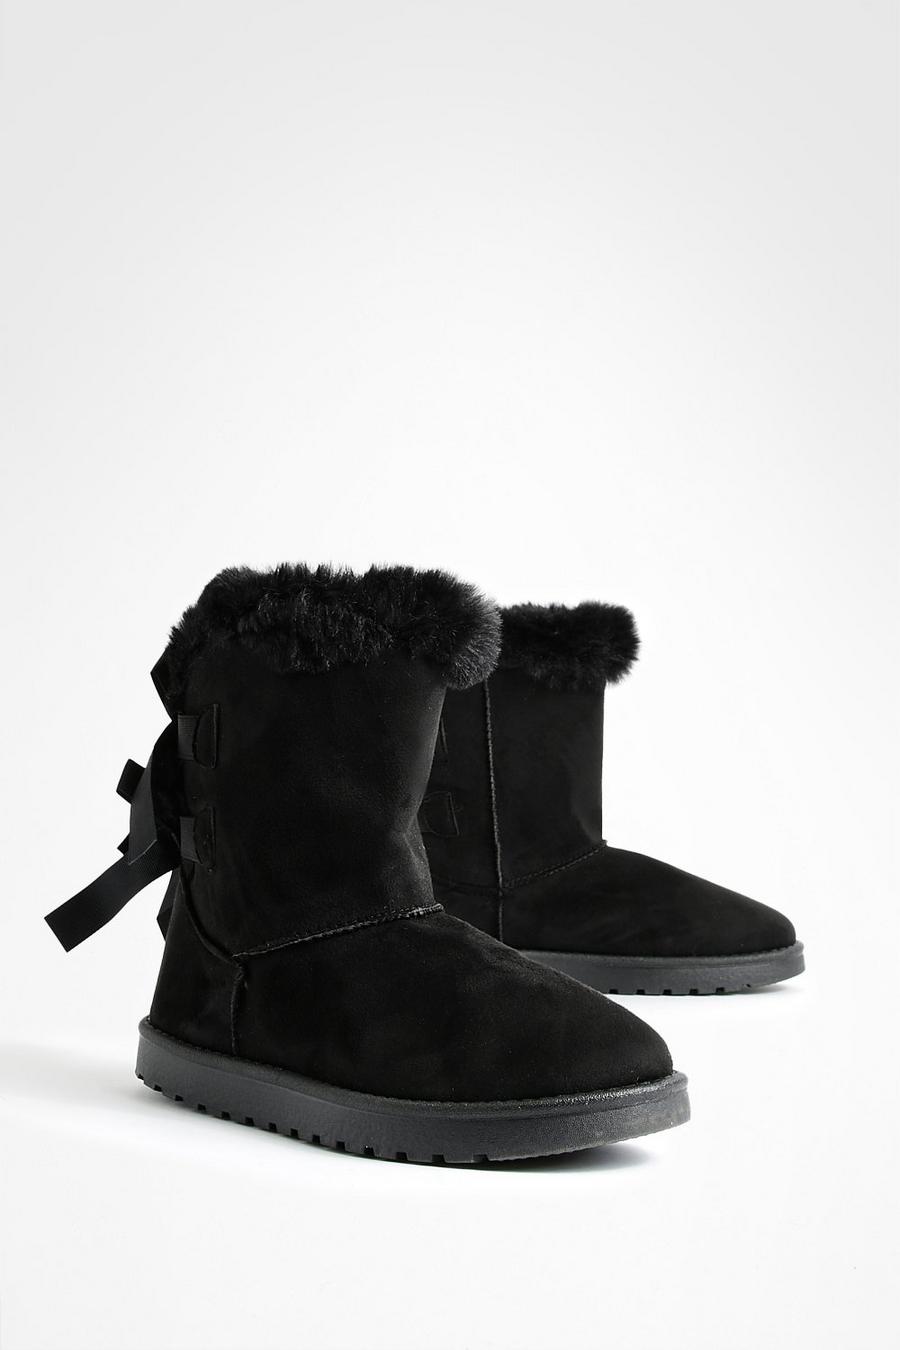 Black Bow Detail Cozy Boots image number 1